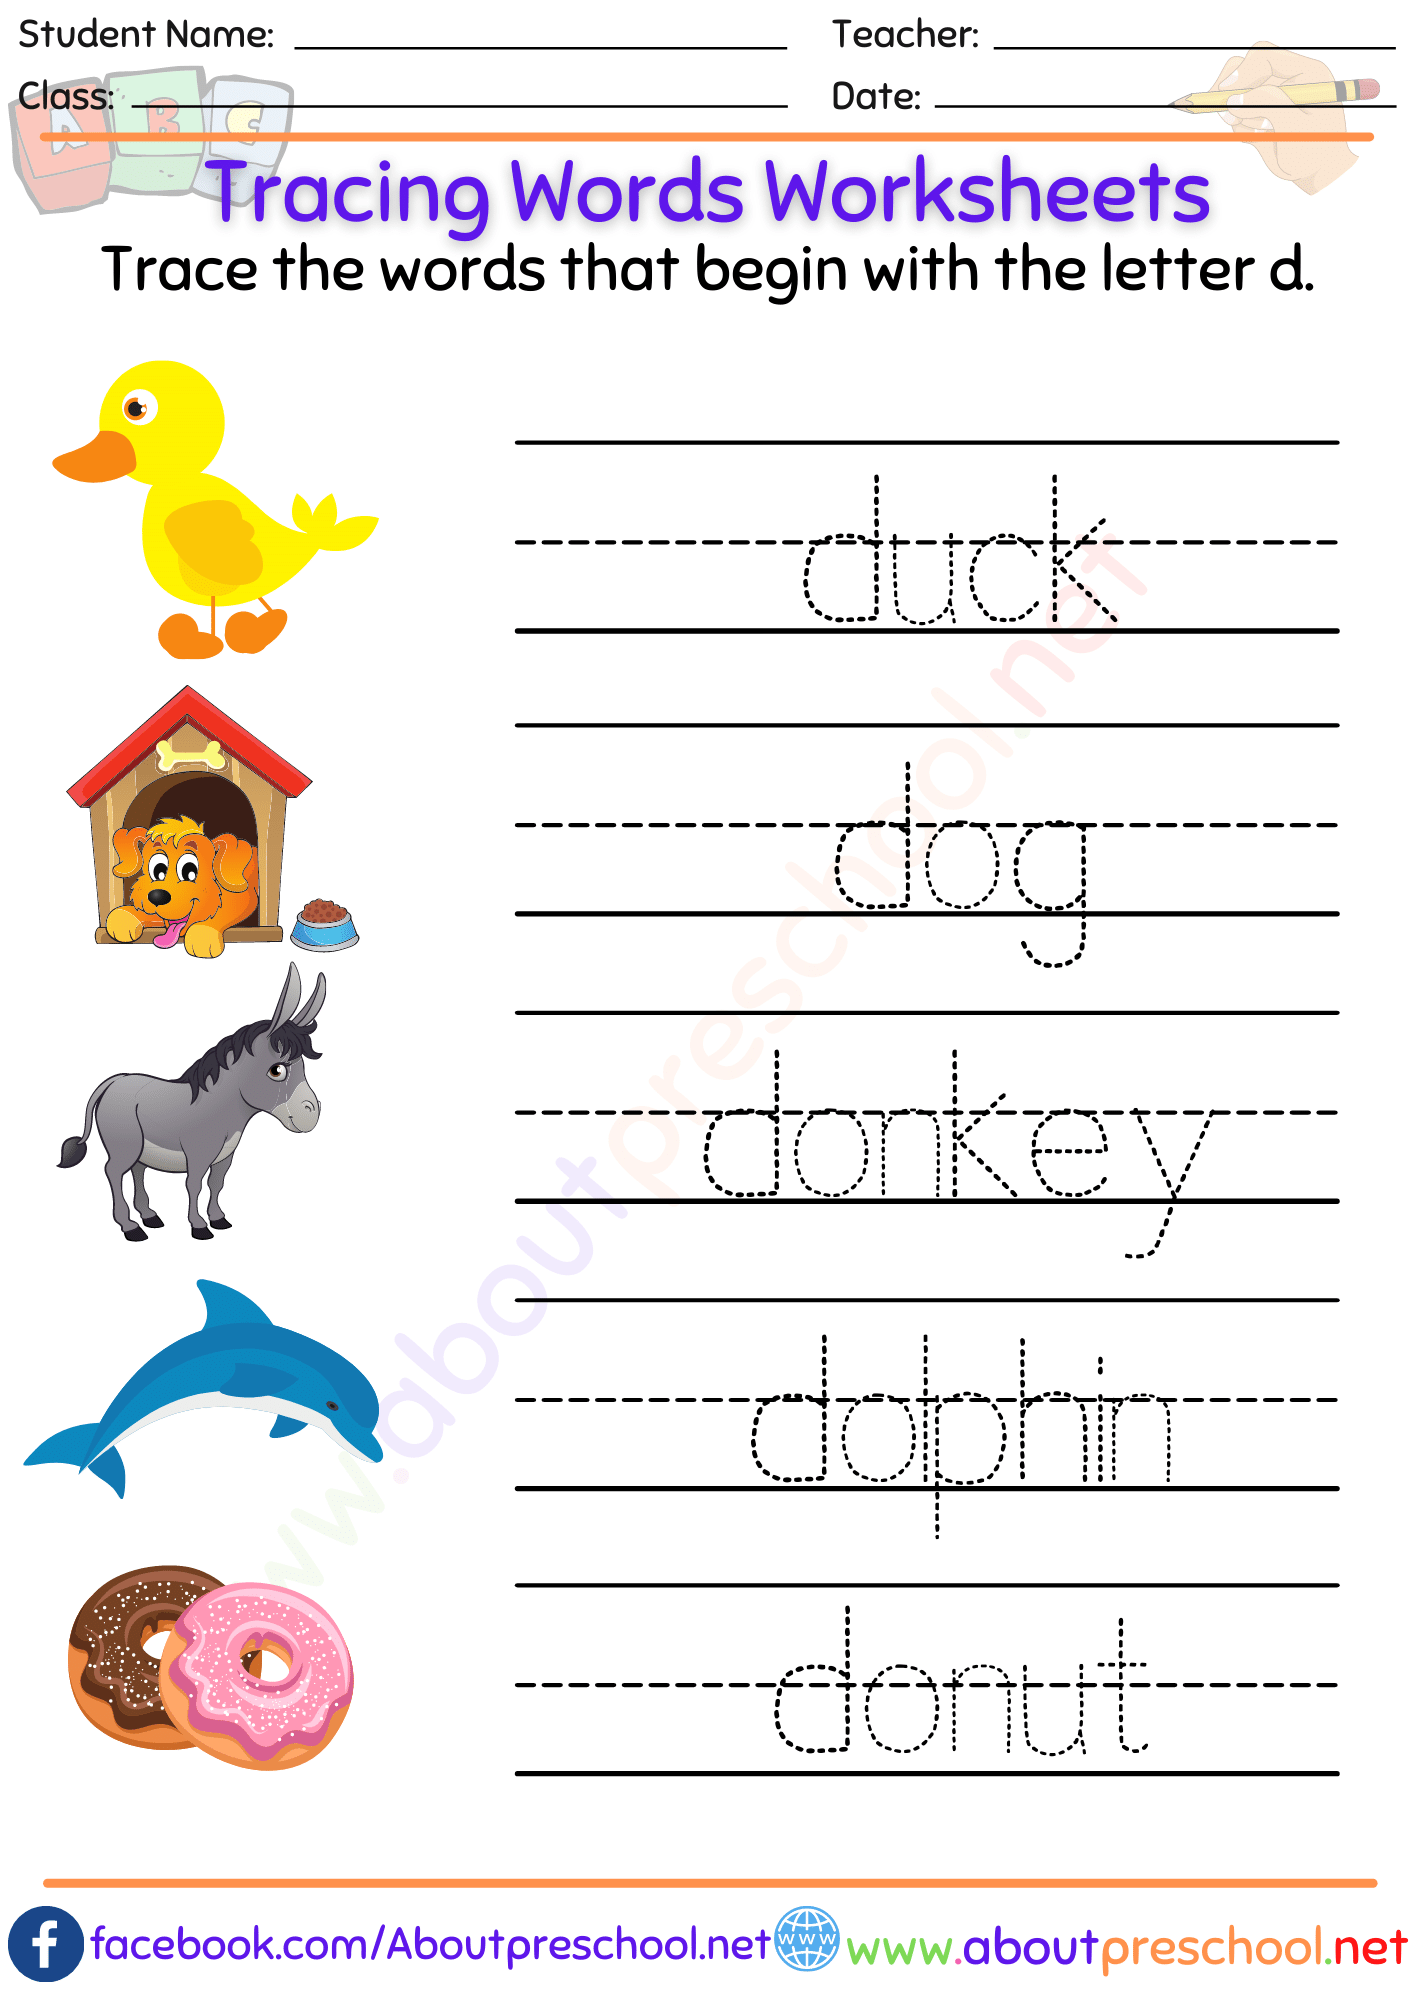 Tracing Words Worksheets-d